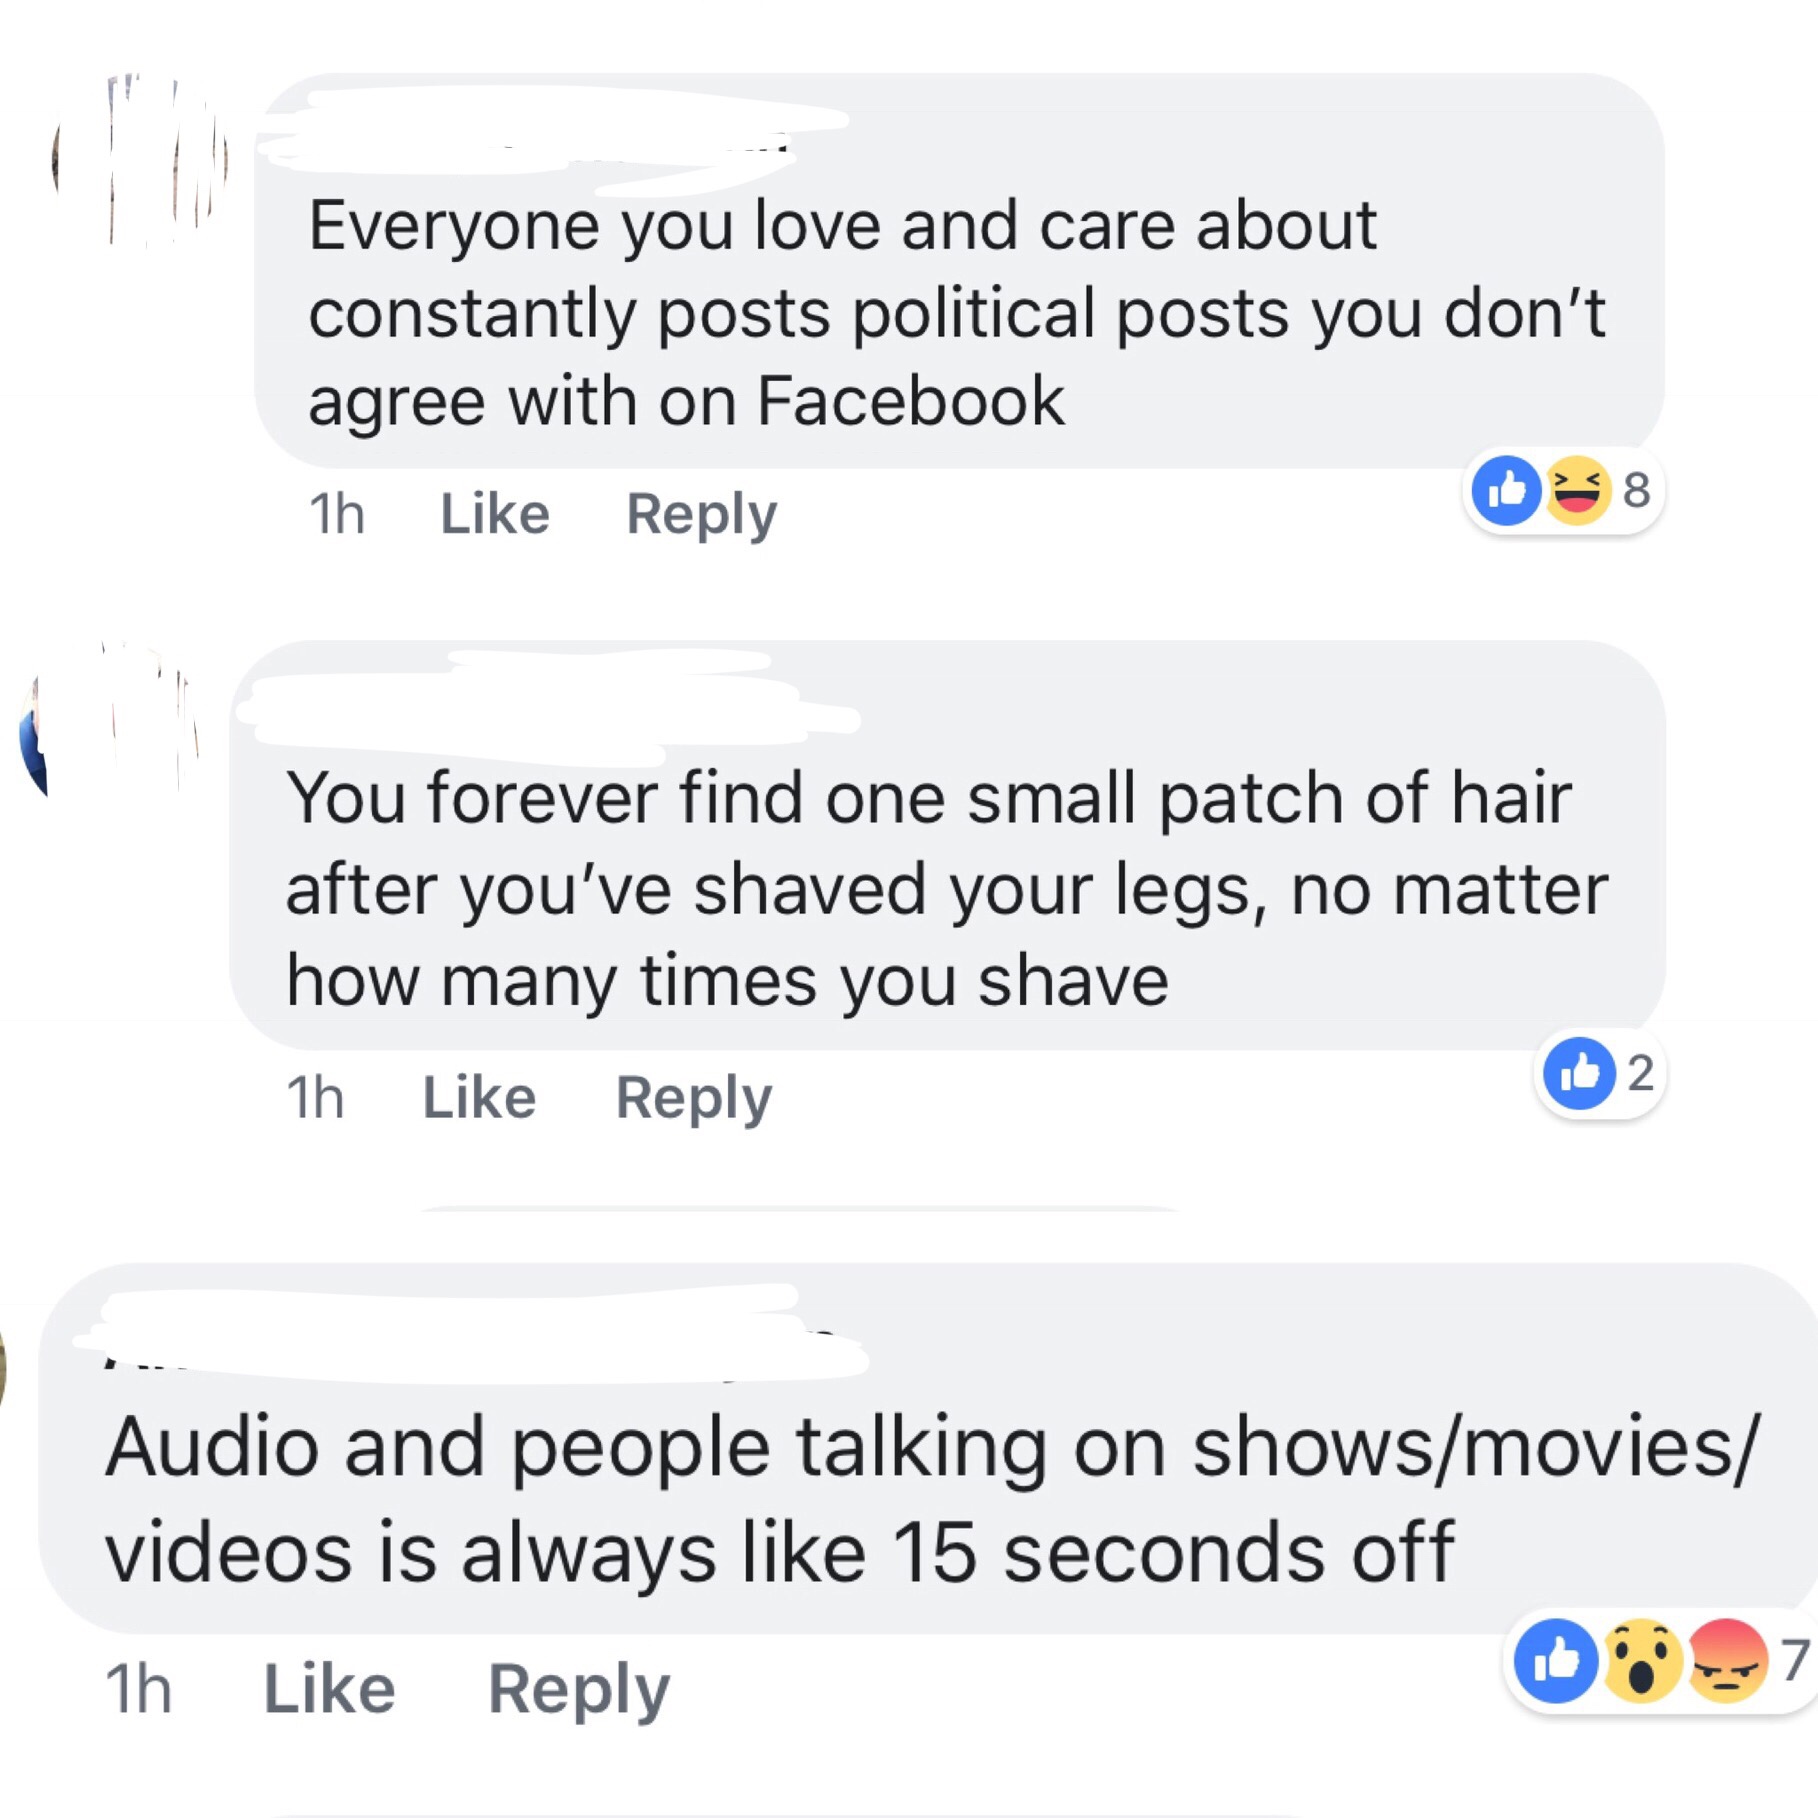 web page - Everyone you love and care about constantly posts political posts you don't agree with on Facebook 1h 8 You forever find one small patch of hair after you've shaved your legs, no matter how many times you shave 1h Audio and people talking on sh